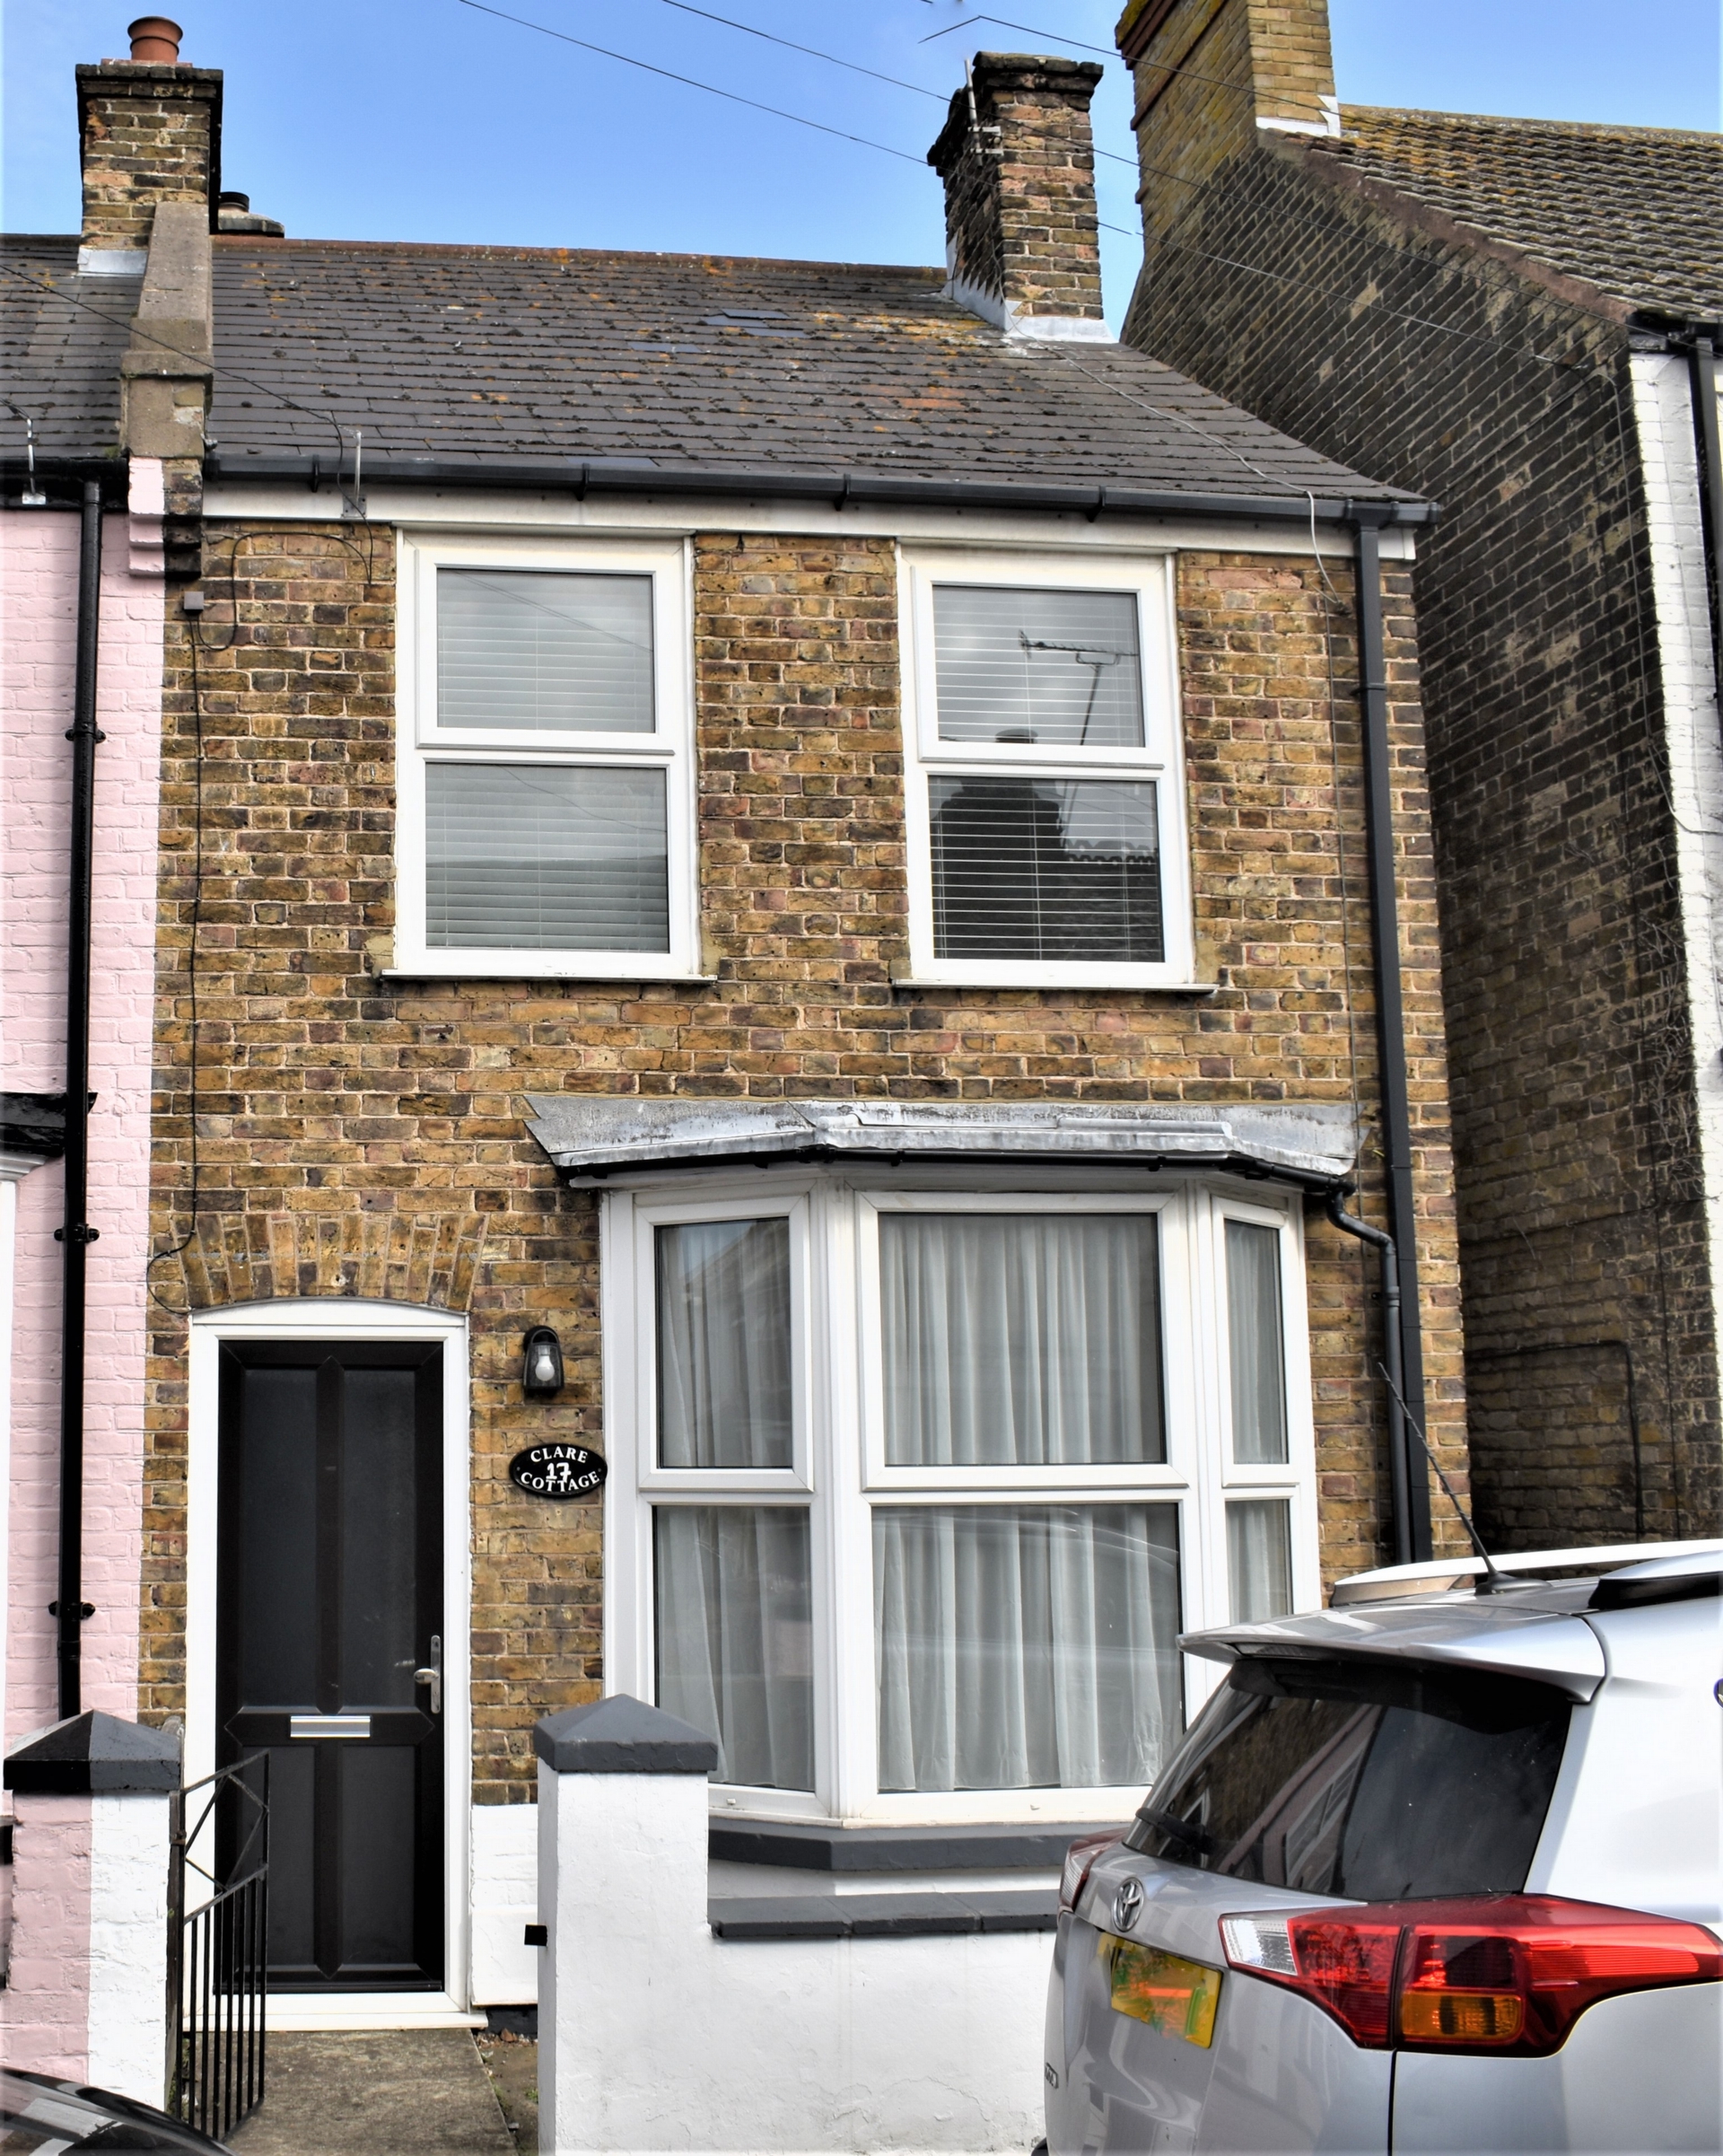 CHIAN FREE - FANTASTIC BROADSTAIRS LOCATION - 2 RECEPTION - 2 BEDROOM PERIOD END OF TERRACED HOUSE.